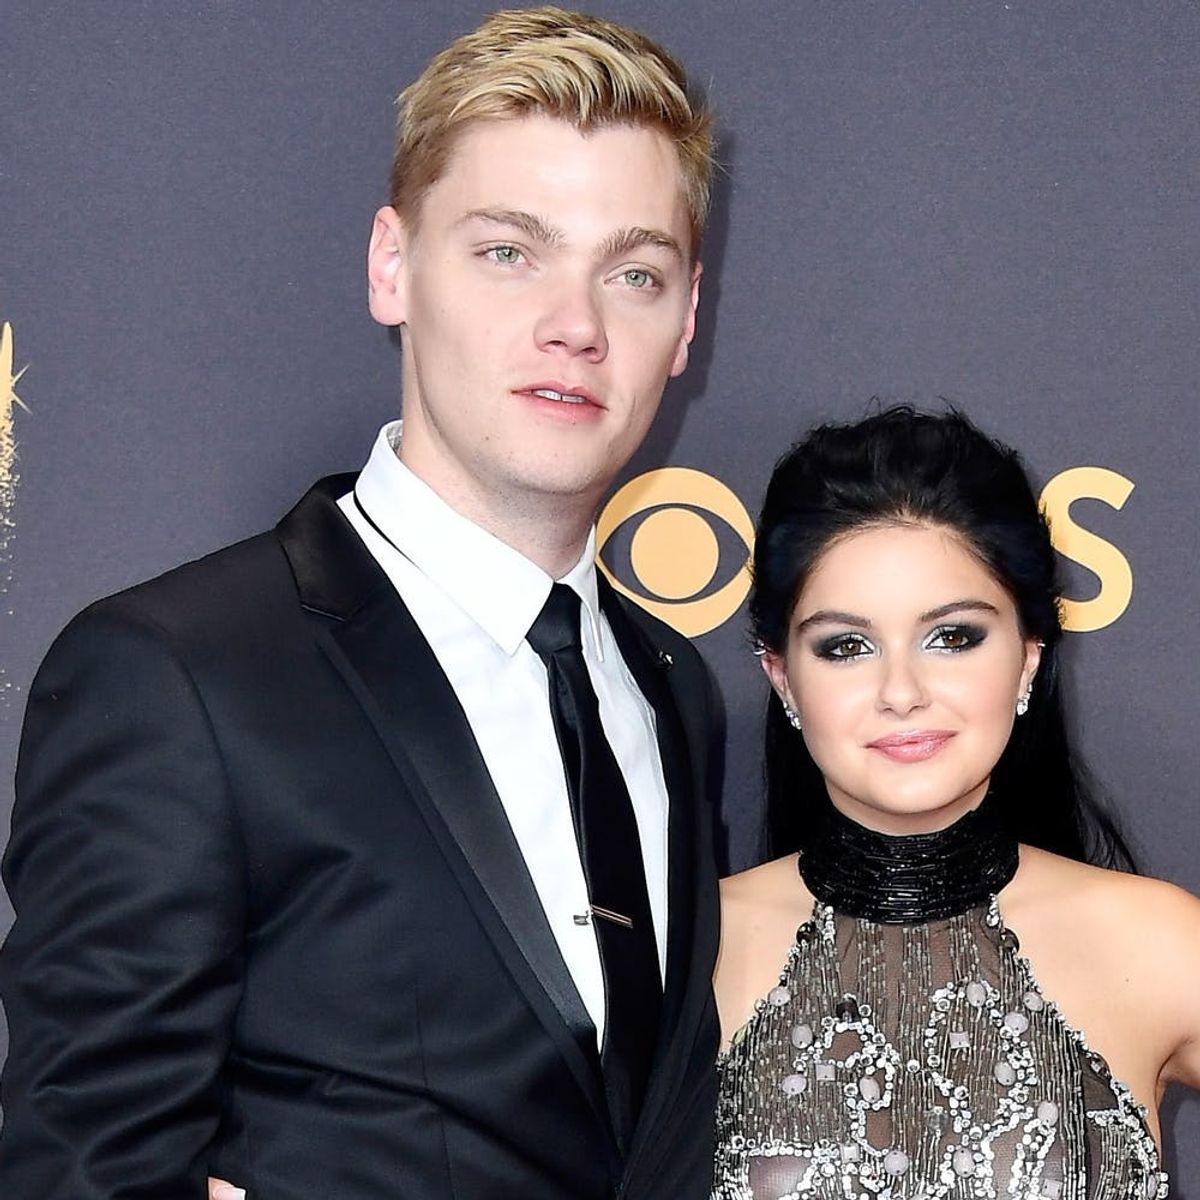 Ariel Winter and Levi Meaden’s 1 Year Anniversary Messages to One Another Will Make You Swoon